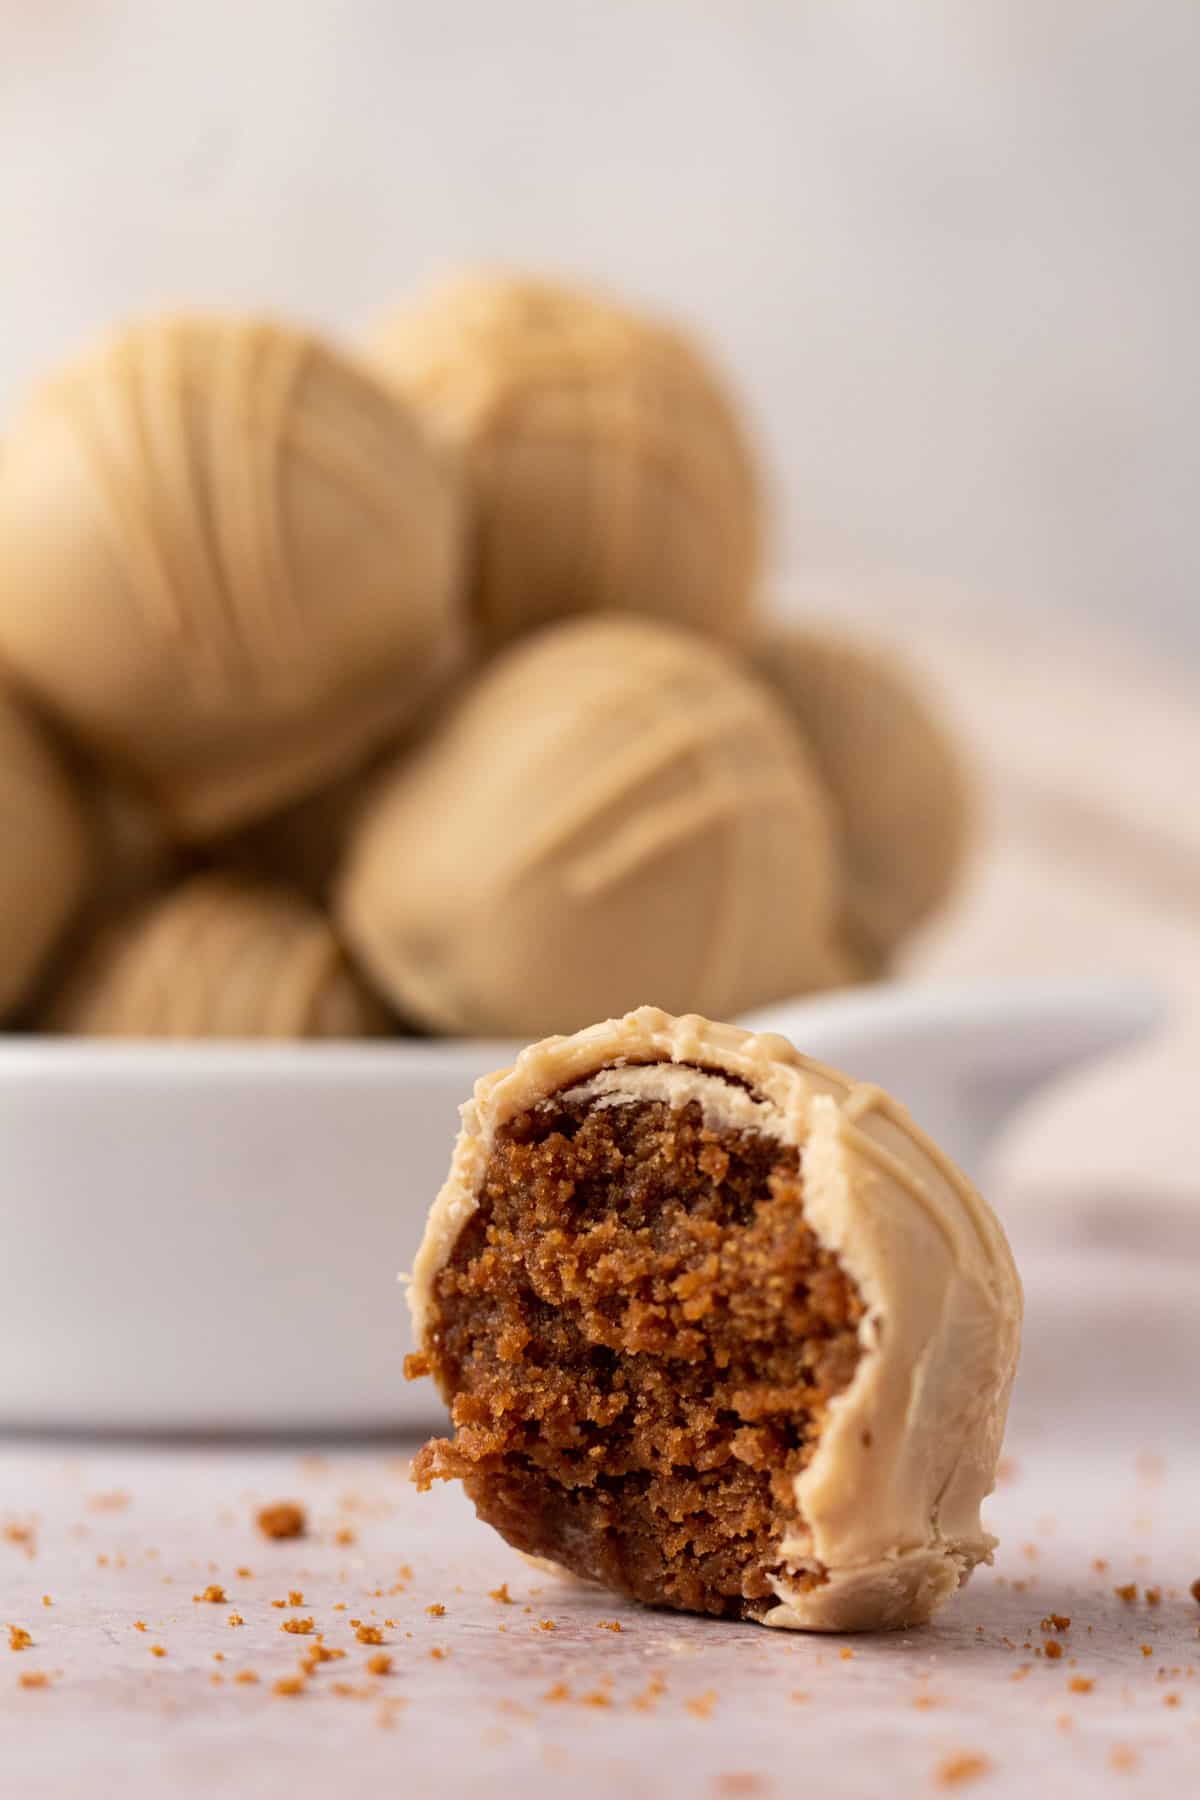 Closeup of a cookie butter truffle with a bite taken out of it showing the interior and exterior white chocolate cookie butter coating.